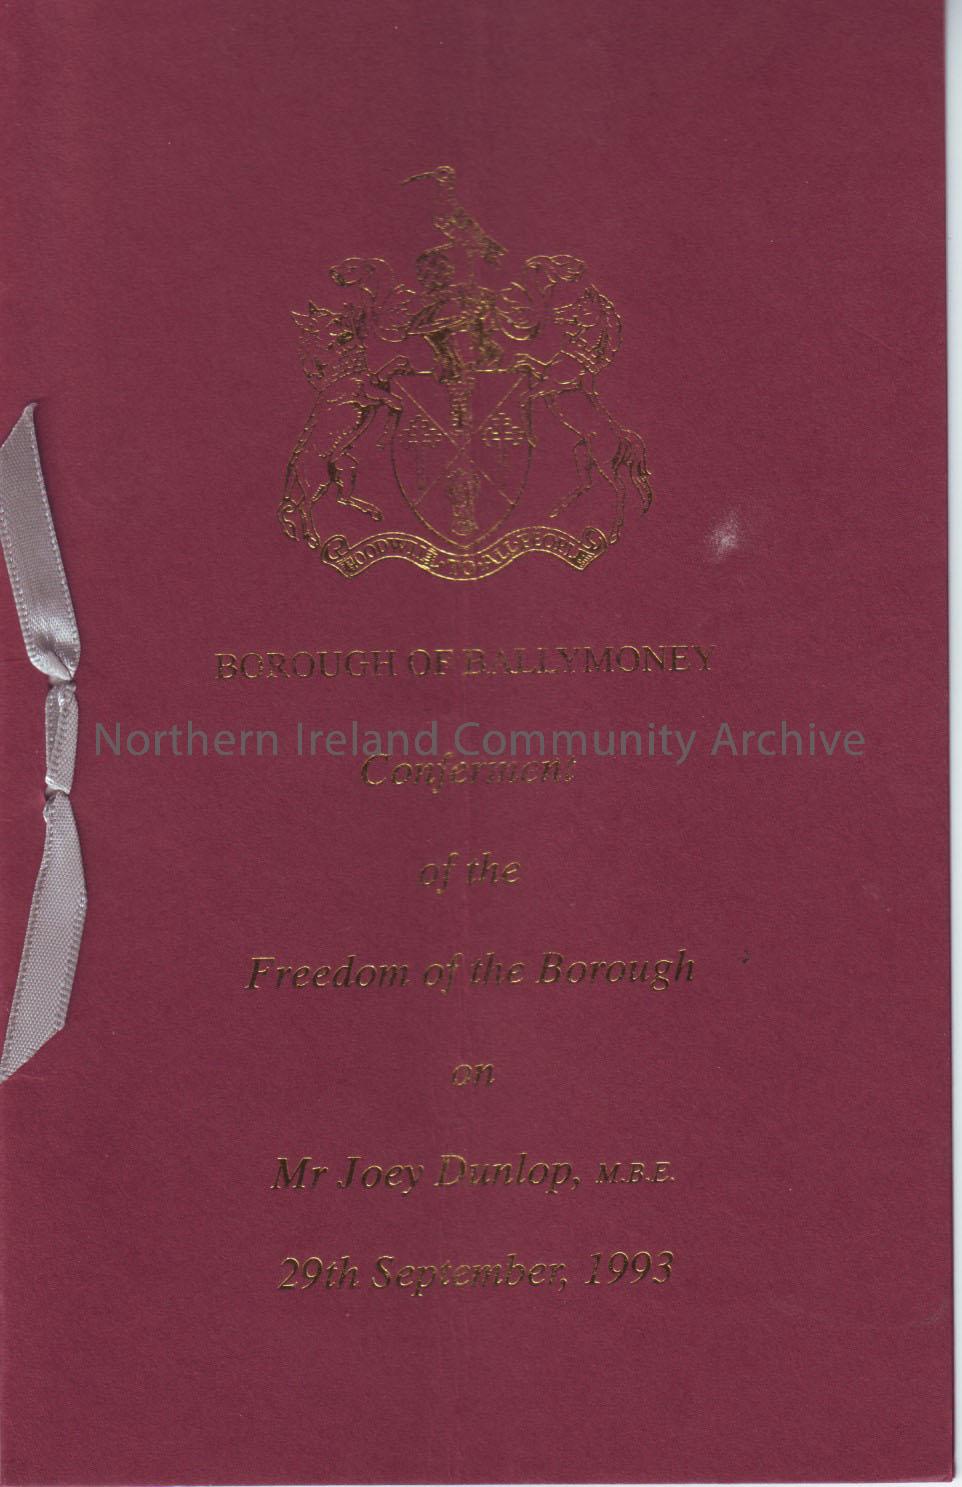 Borough of Ballymoney conferment of the Freedom of the Borough on Mr Joey Dunlop, M.B.E 29th September, 1993 programme and civic dinner menus. – 2011.292 (2)